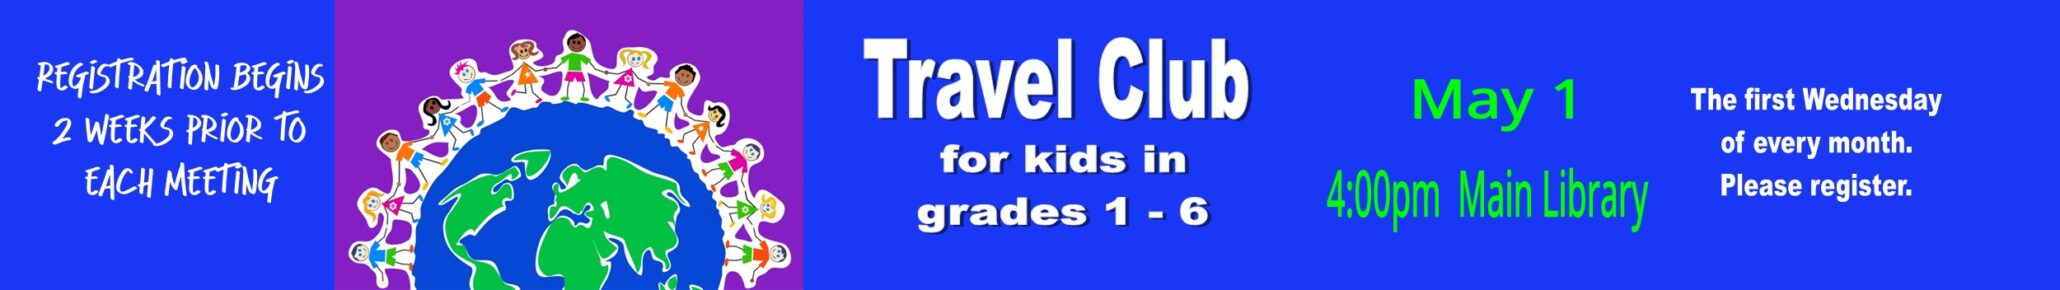 travel club for kids at the main library on may 1